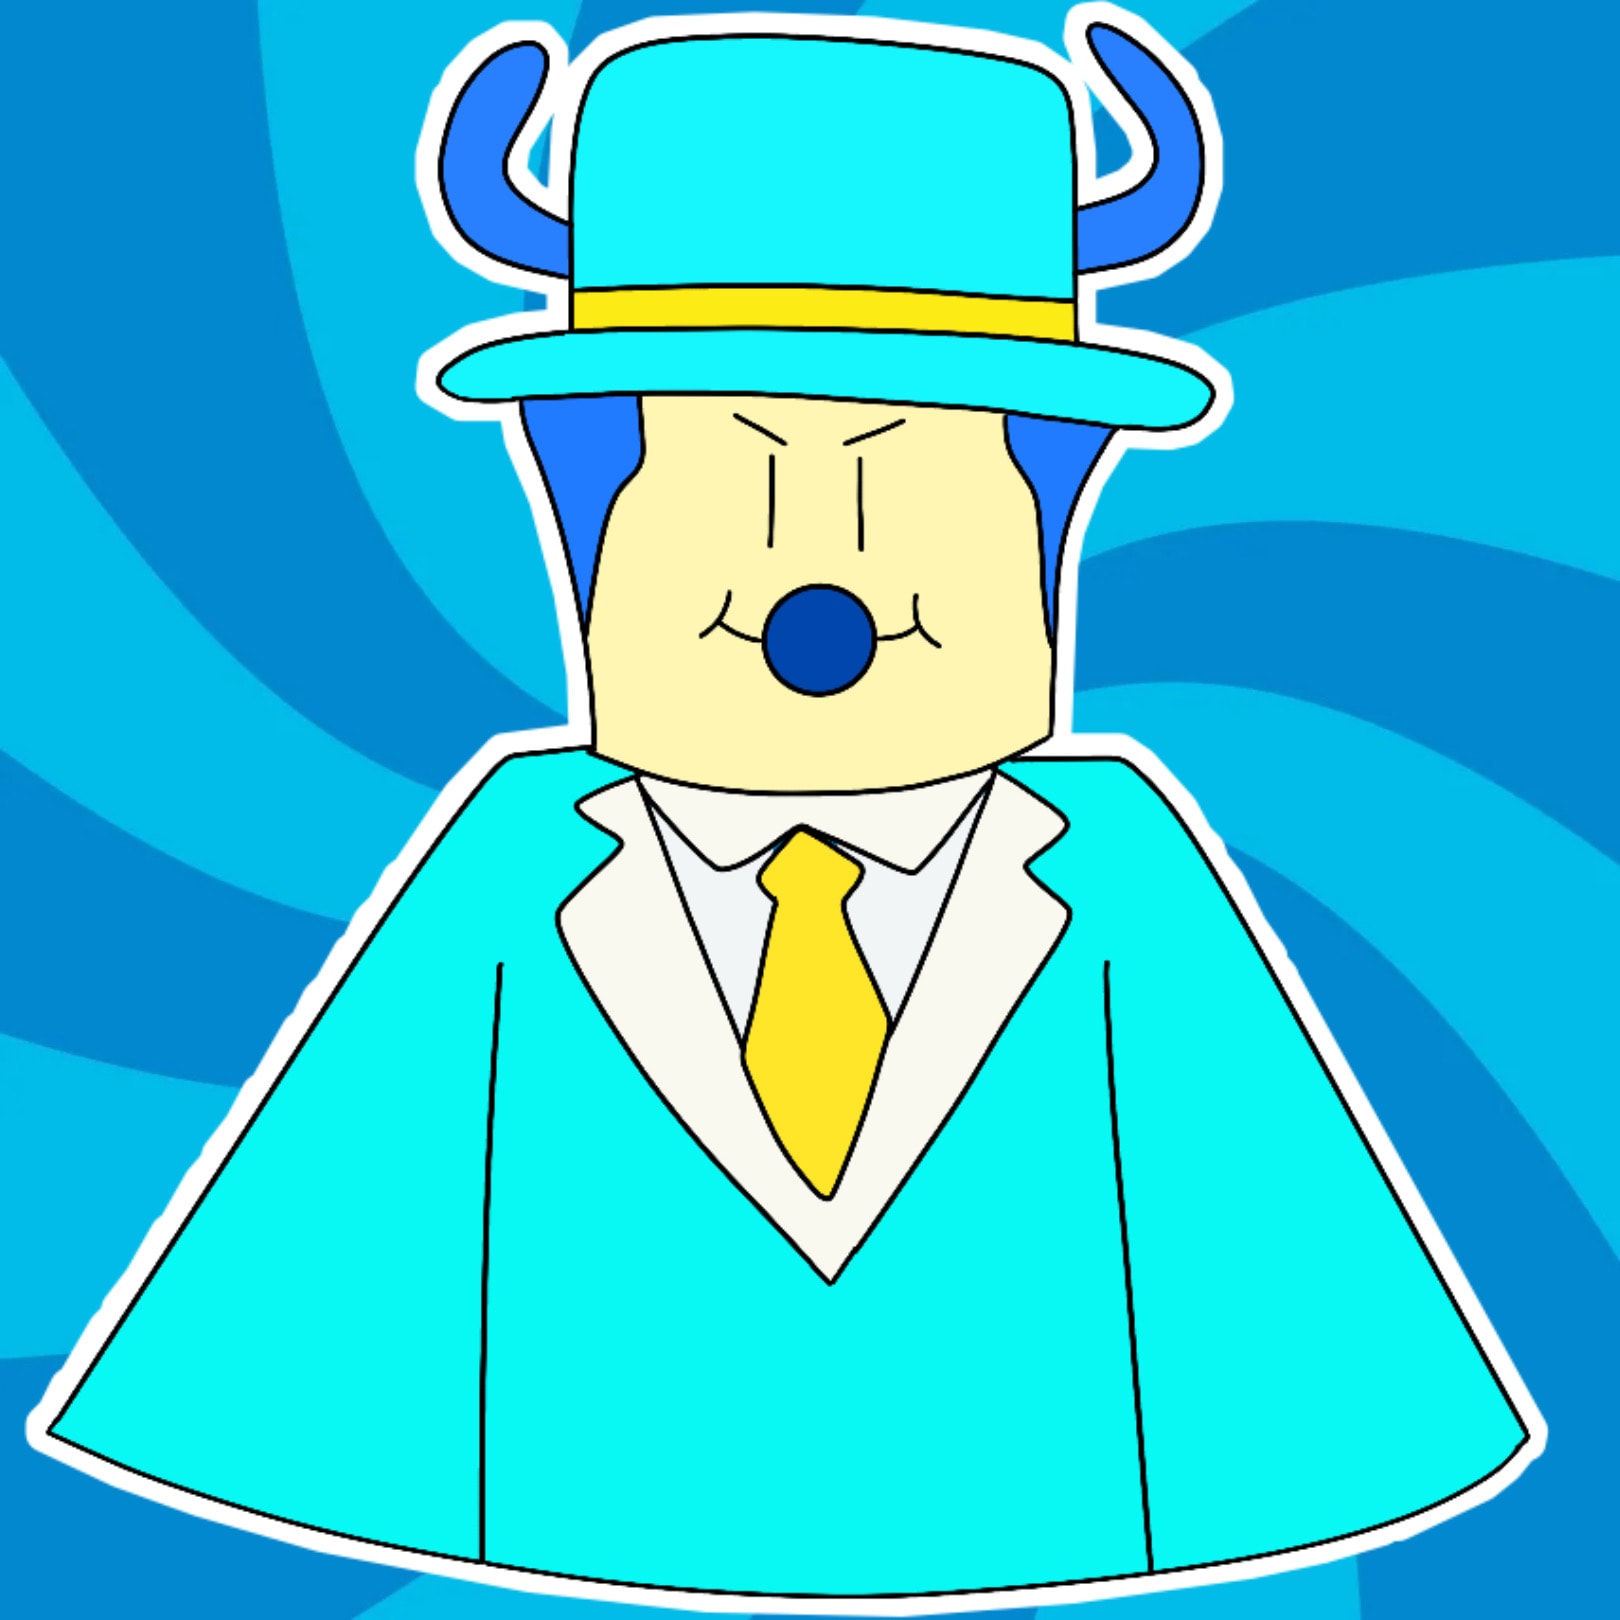 Draw Your Roblox Character By Kingblox Fiverr - roblox full character color